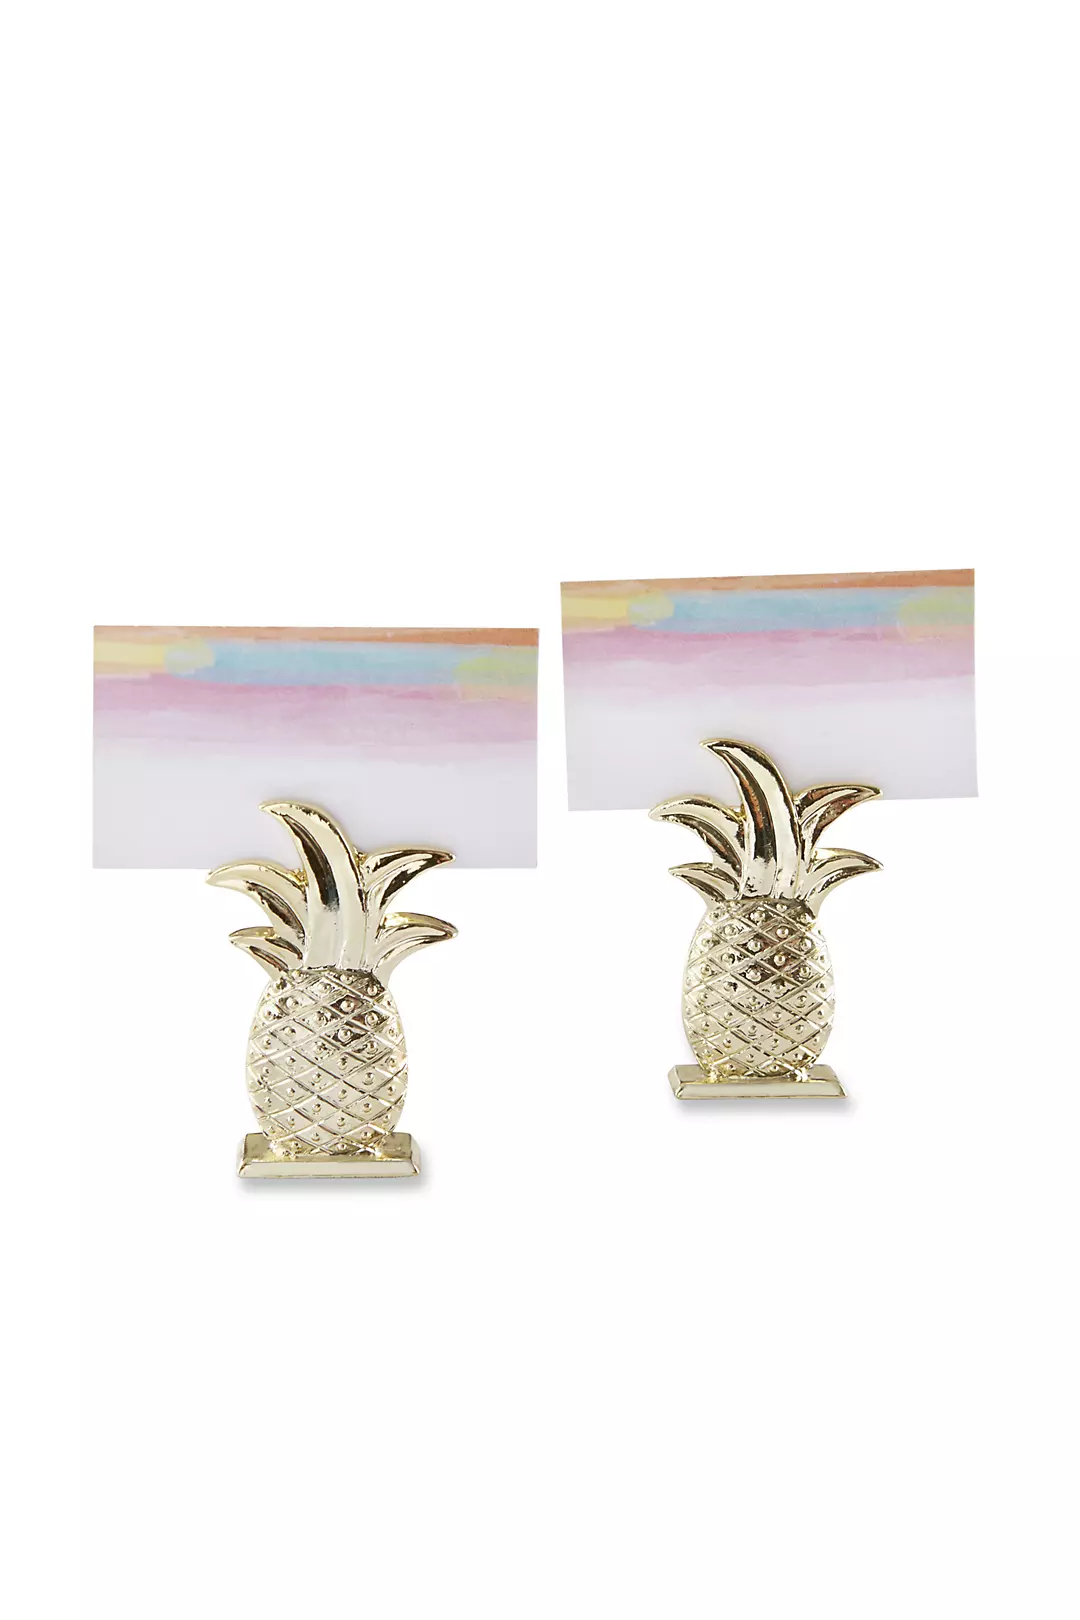 Gold Pineapple Place Card Holders Set of 6 Image